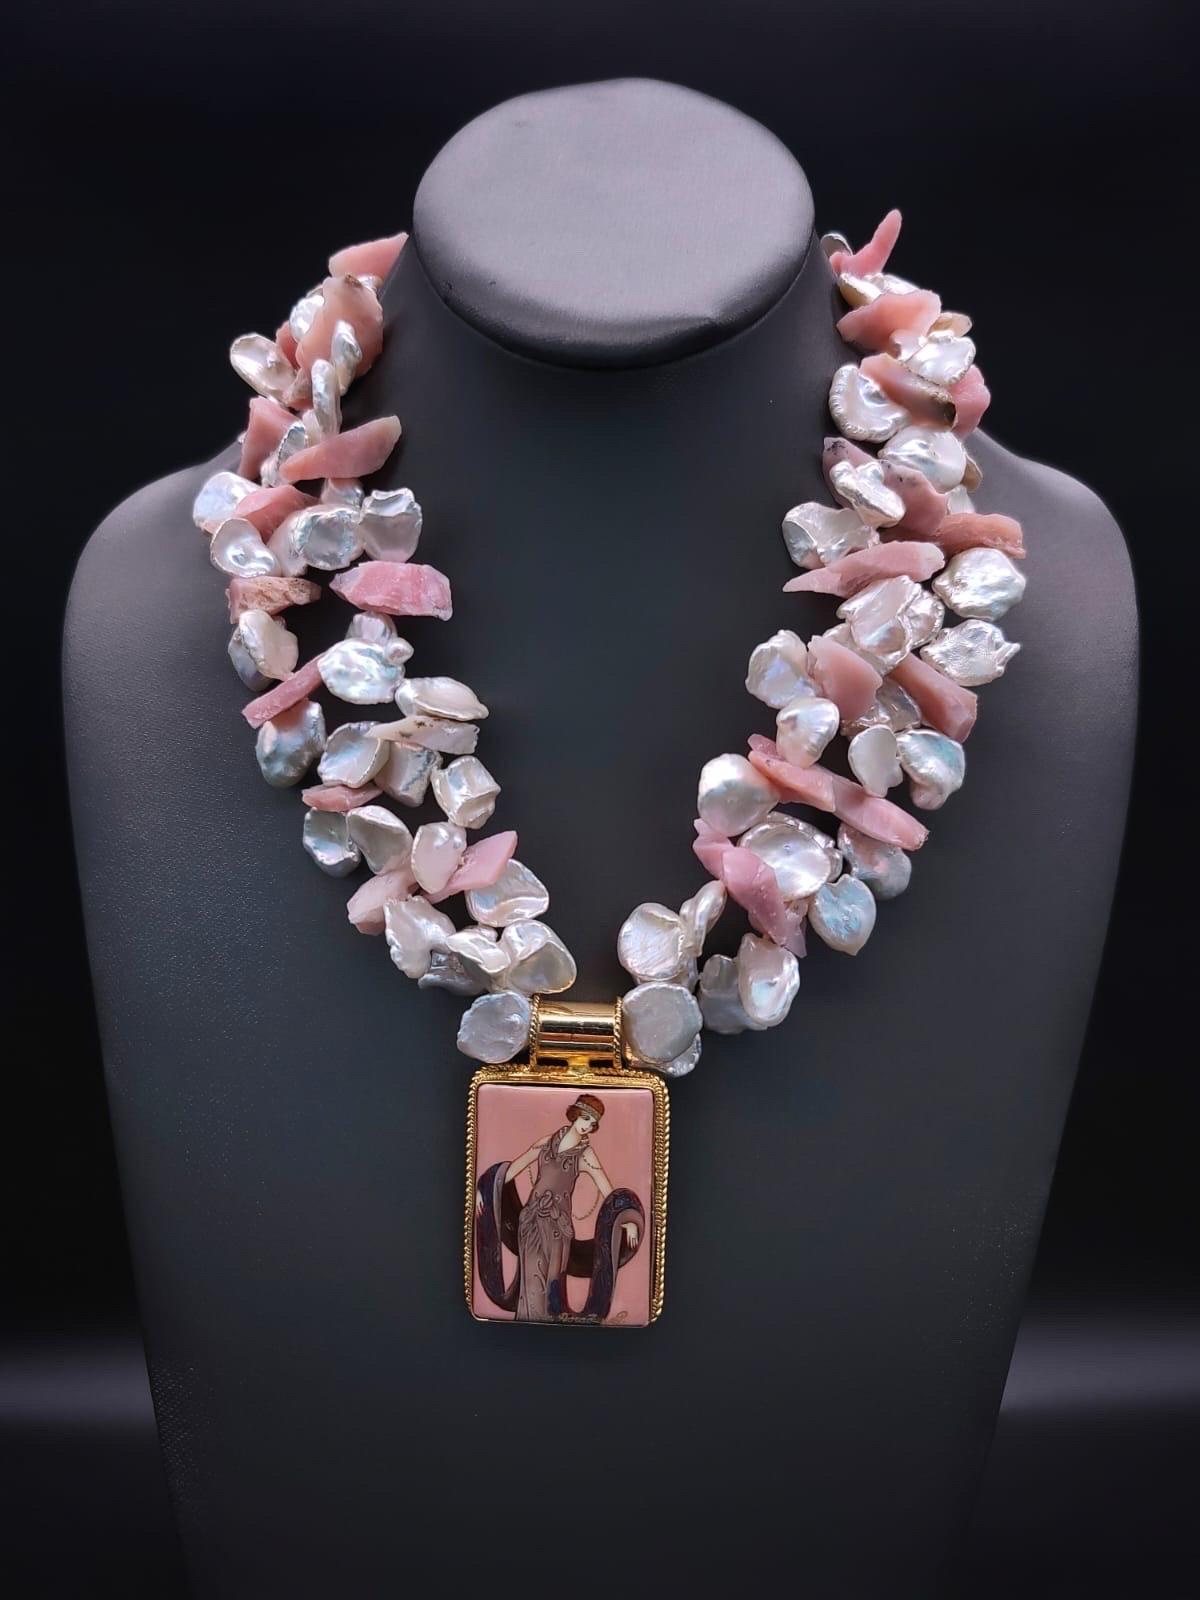 Mixed Cut A.Jeschel Fabulous Keshi Pearls necklace with an Art Deco pendant. For Sale